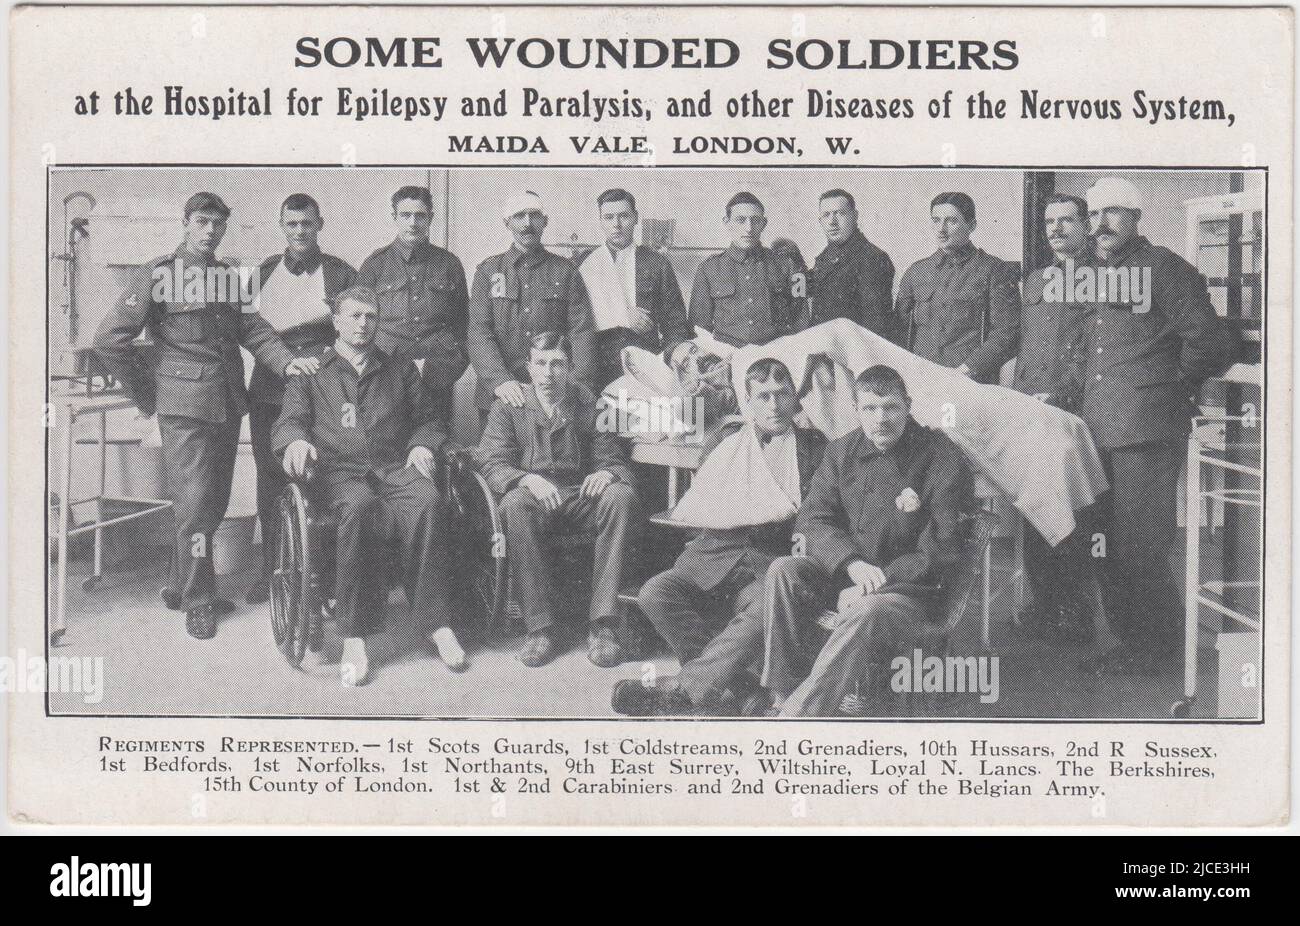 'Some Wounded Soldiers at the Hospital for Epilepsy and Paralysis, and other Diseases of the Nervous System, Maida Vale, London': group of First World War soldiers in uniform, including one man in a wheelchair, one lying in a hospital bed, and others with bandages around their arms and heads. Regiments represented include Scots Guards, Coldstream Guards, Grenadiers, 10th Hussars, Sussex, Bedfordshire, Norfolk, Northamptonshire, East Surrey, Wiltshire, Loyal North Lancashire, Berkshire & 15th County of London Regiment, Carabiniers & the Belgian army Stock Photo